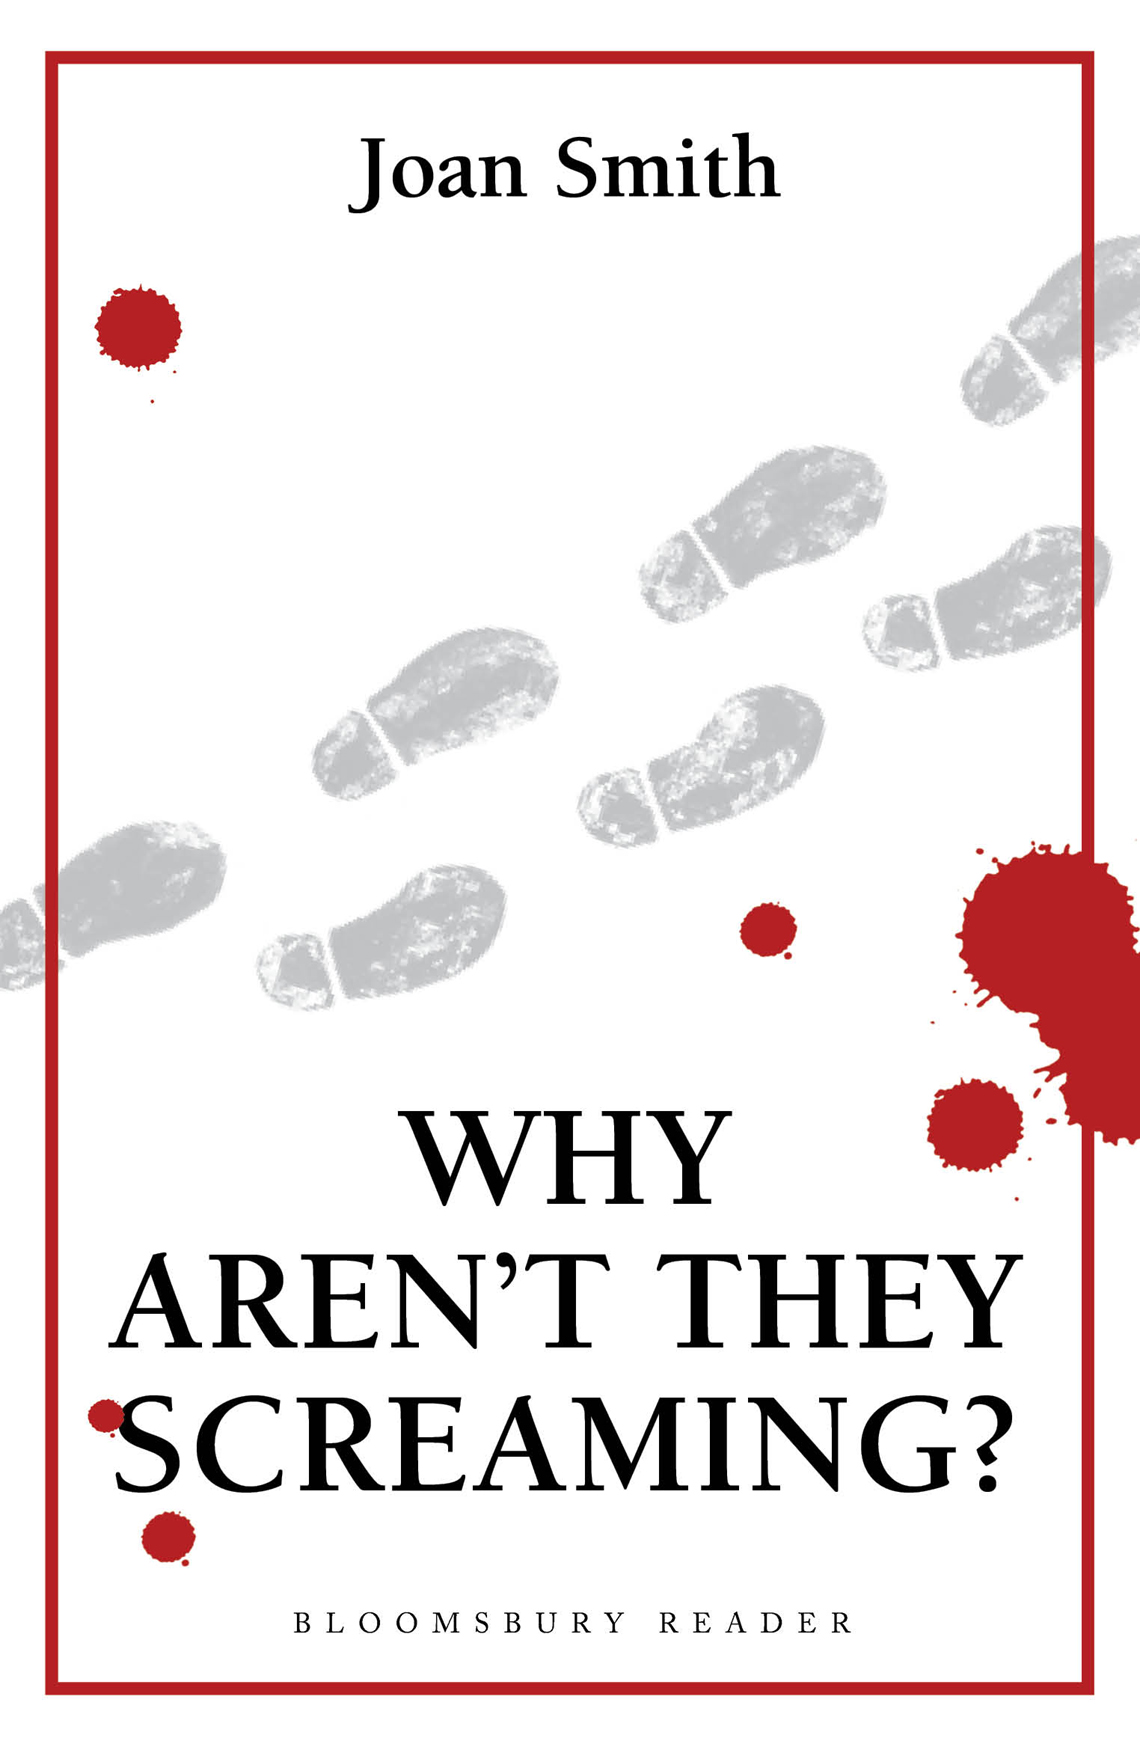 Why Aren't They Screaming? (1988)